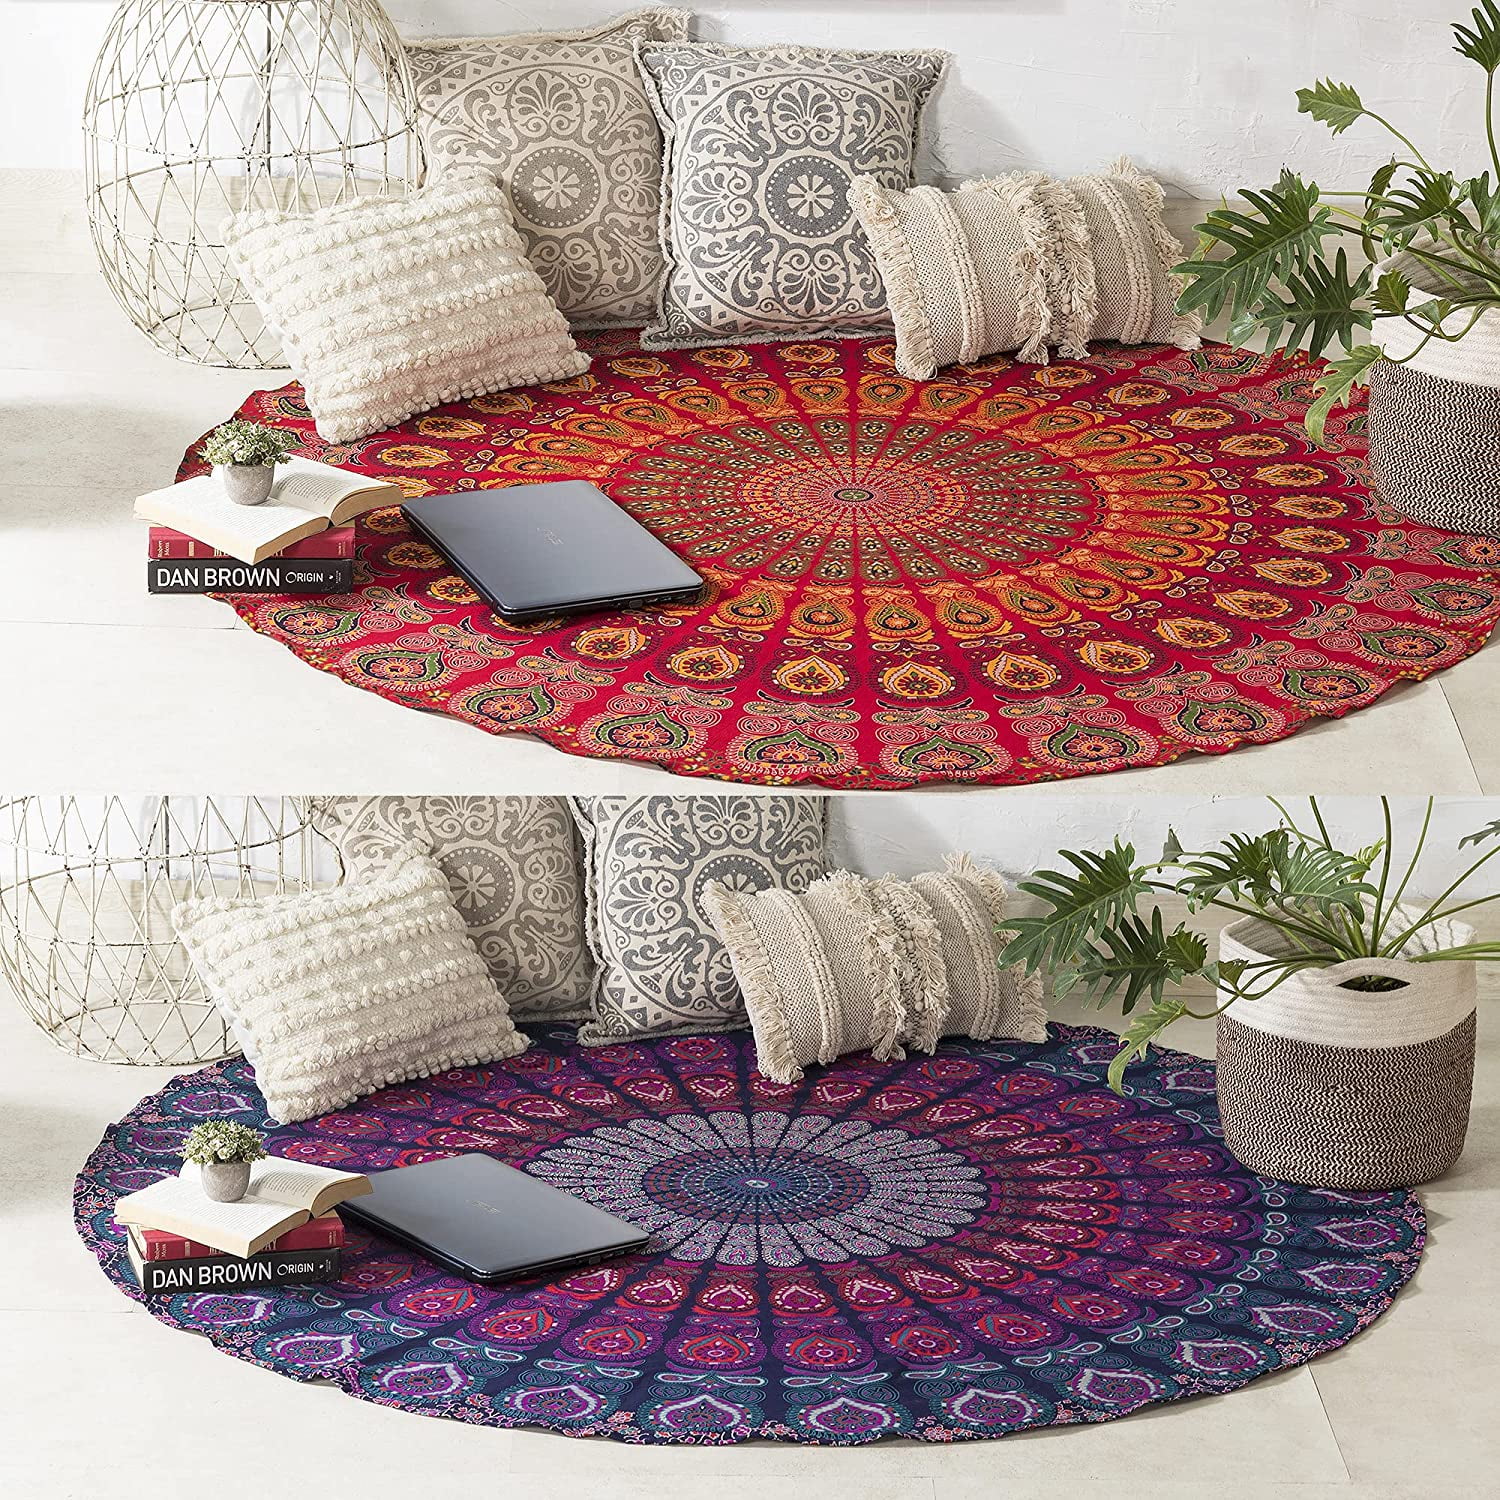 Cotton Mandala Roundies Beach Throw Indian Round Tapestry Table Cloth Sofa Cover 